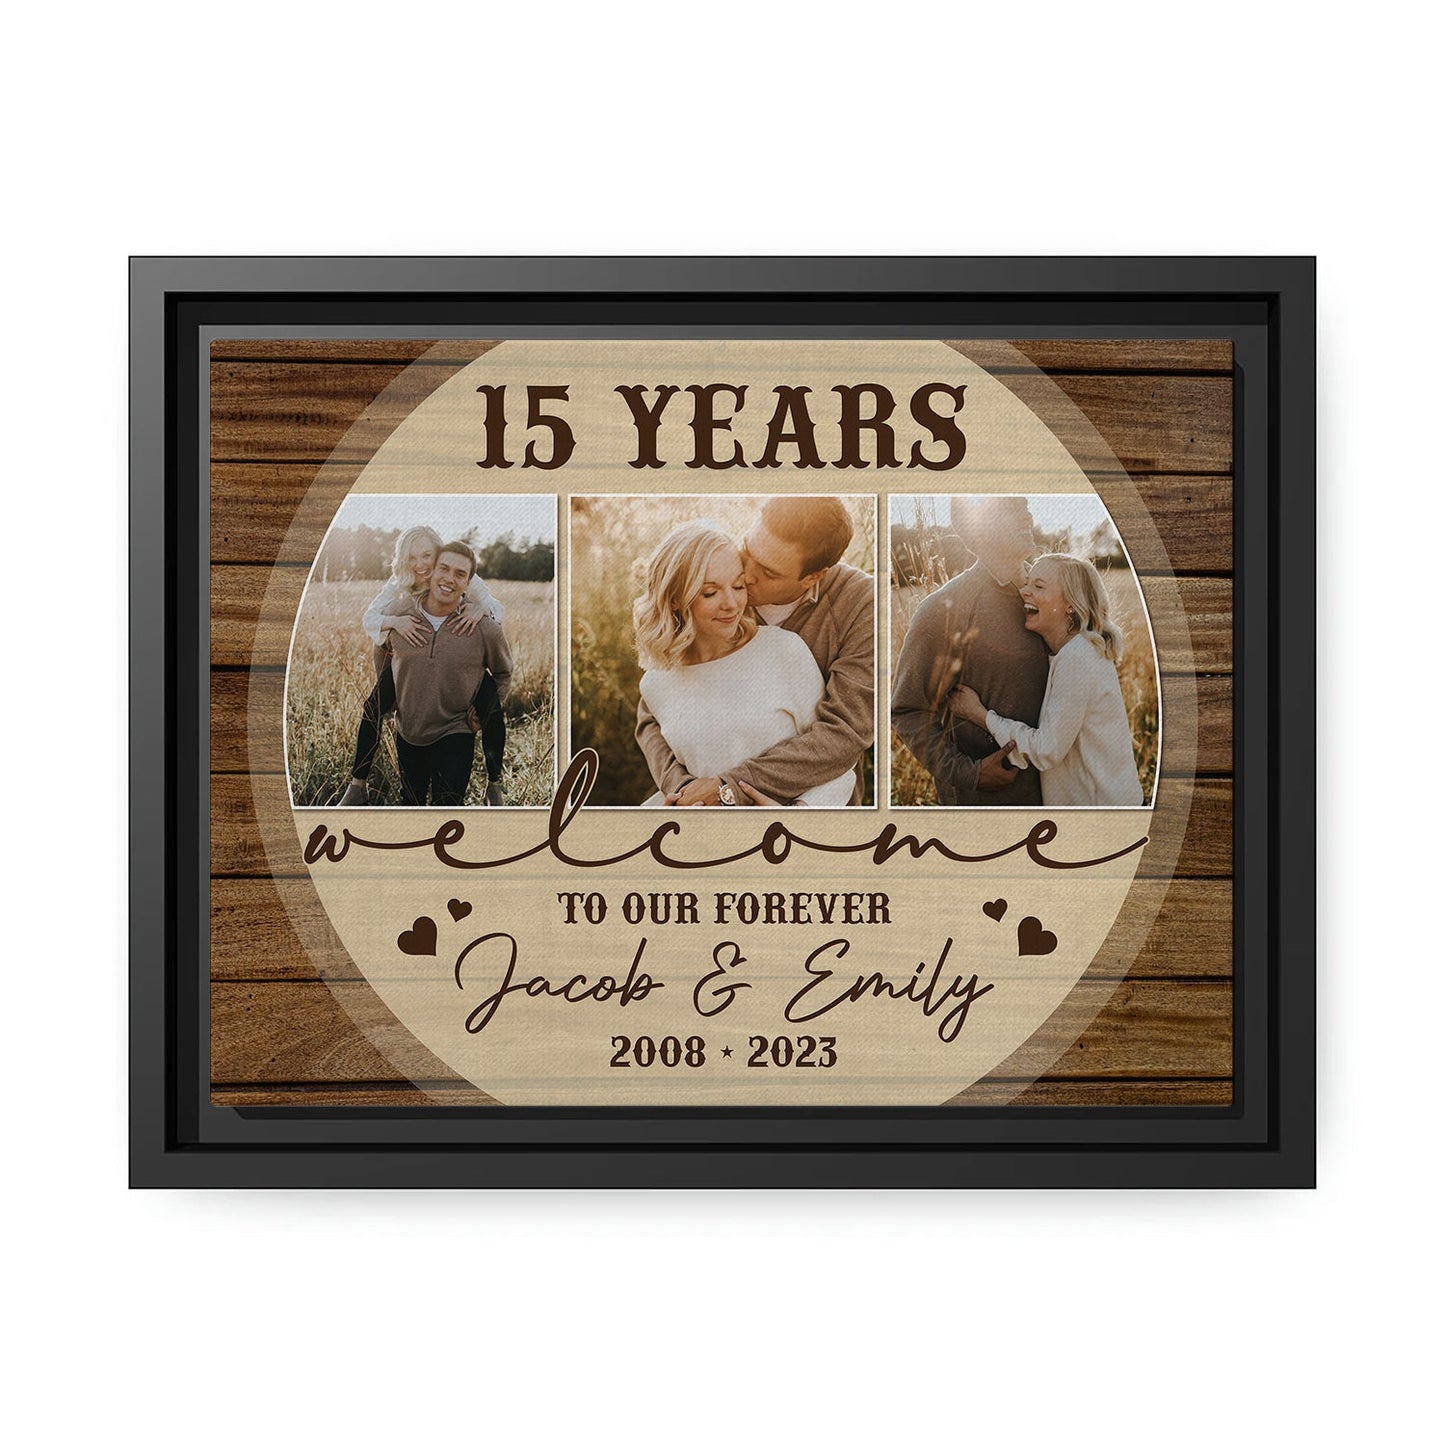 Welcome To Our Forever - Personalized 15 Year Anniversary gift for him for her - Custom Canvas - MyMindfulGifts